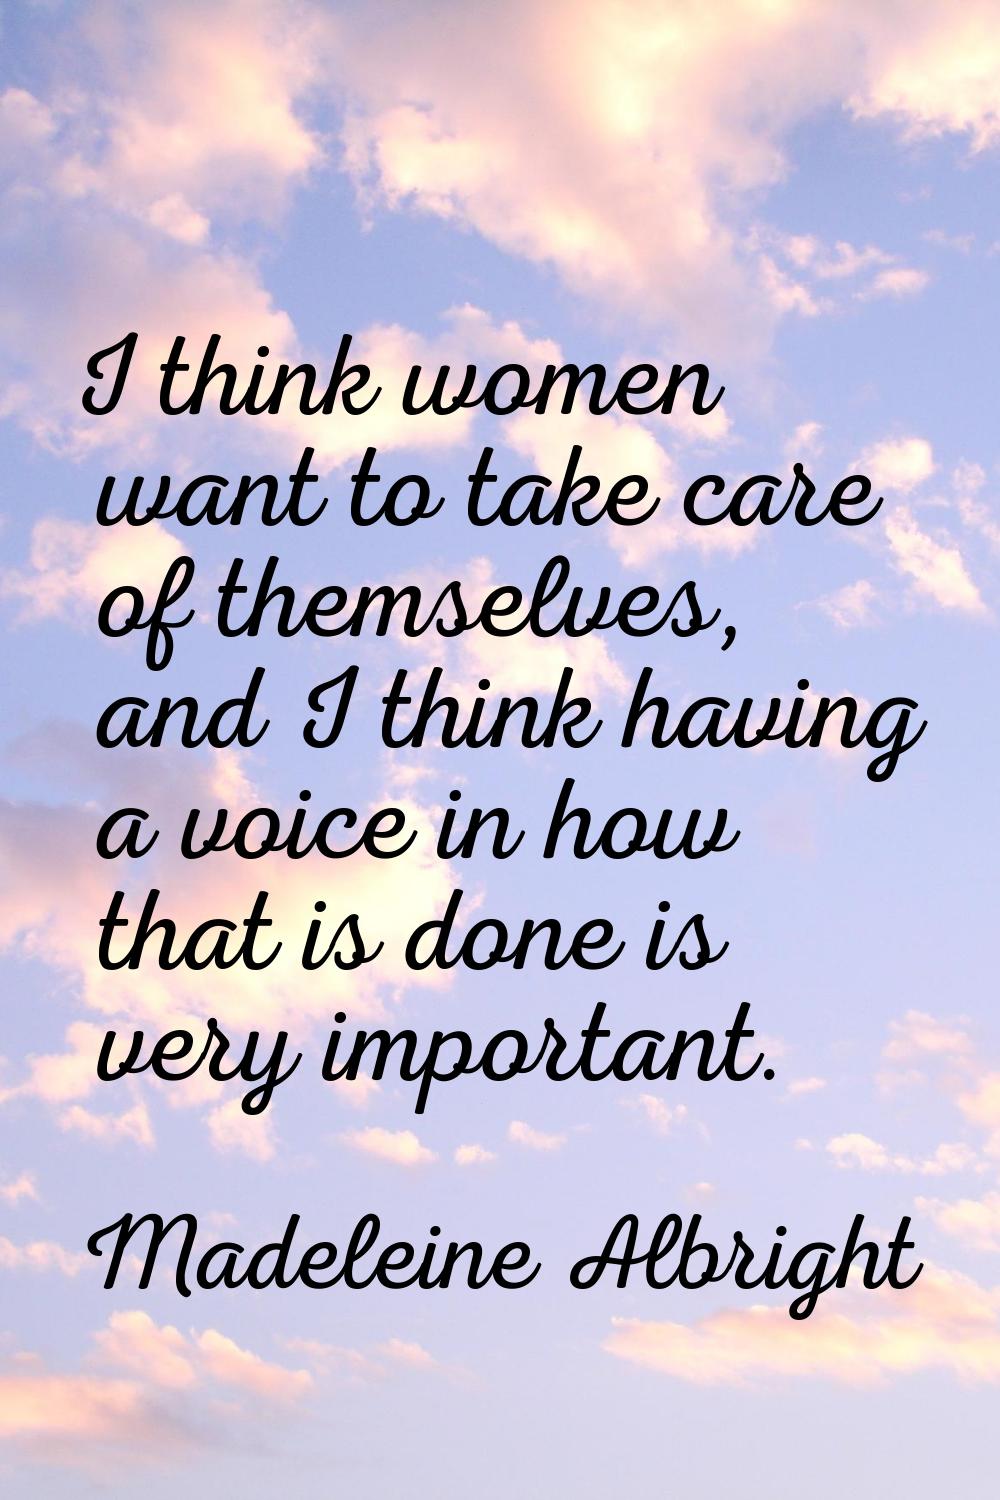 I think women want to take care of themselves, and I think having a voice in how that is done is ve